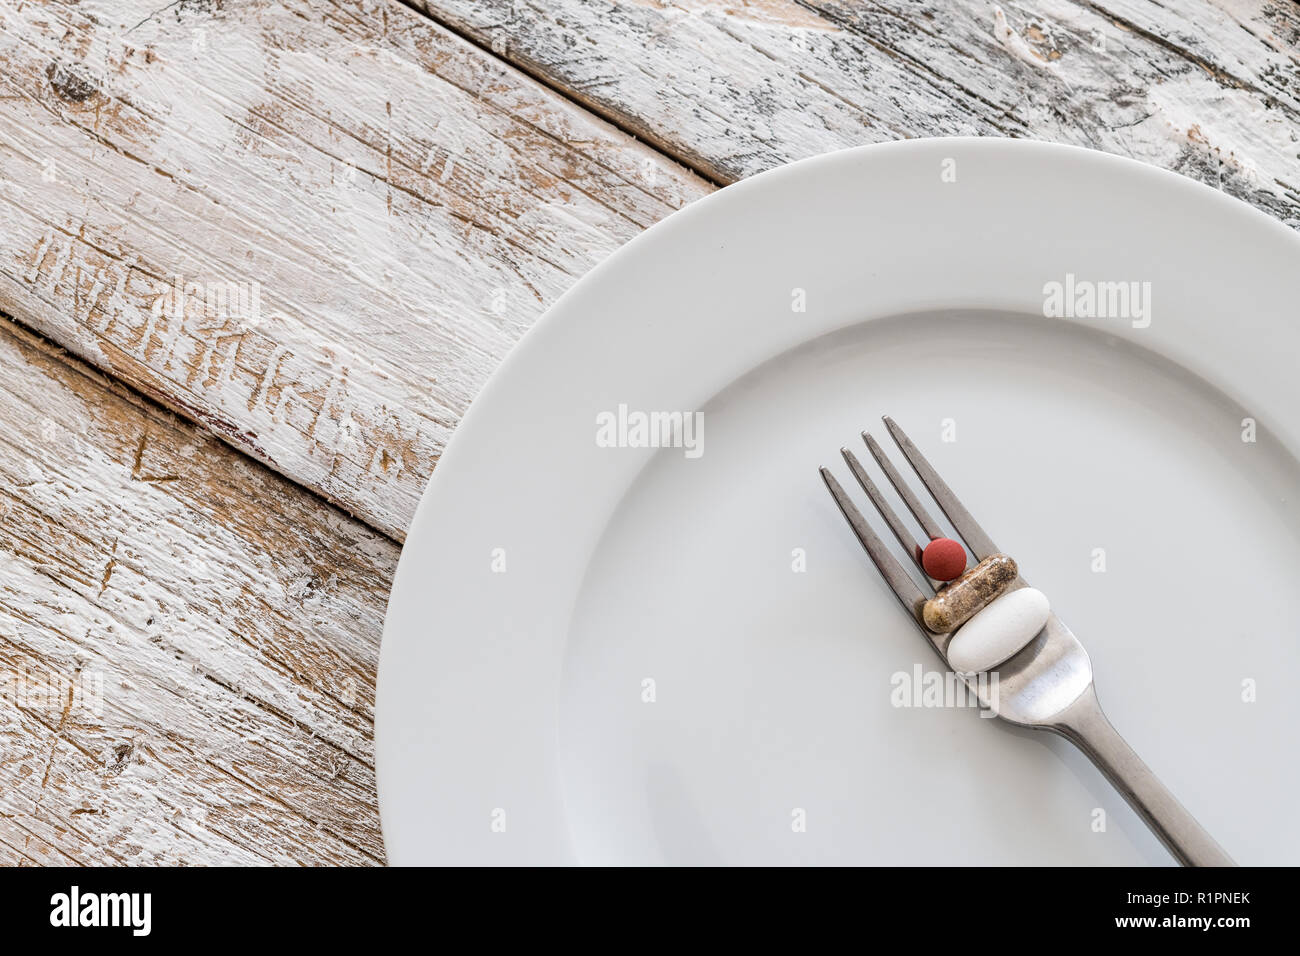 Tablets with silver fork on an old wooden table Stock Photo